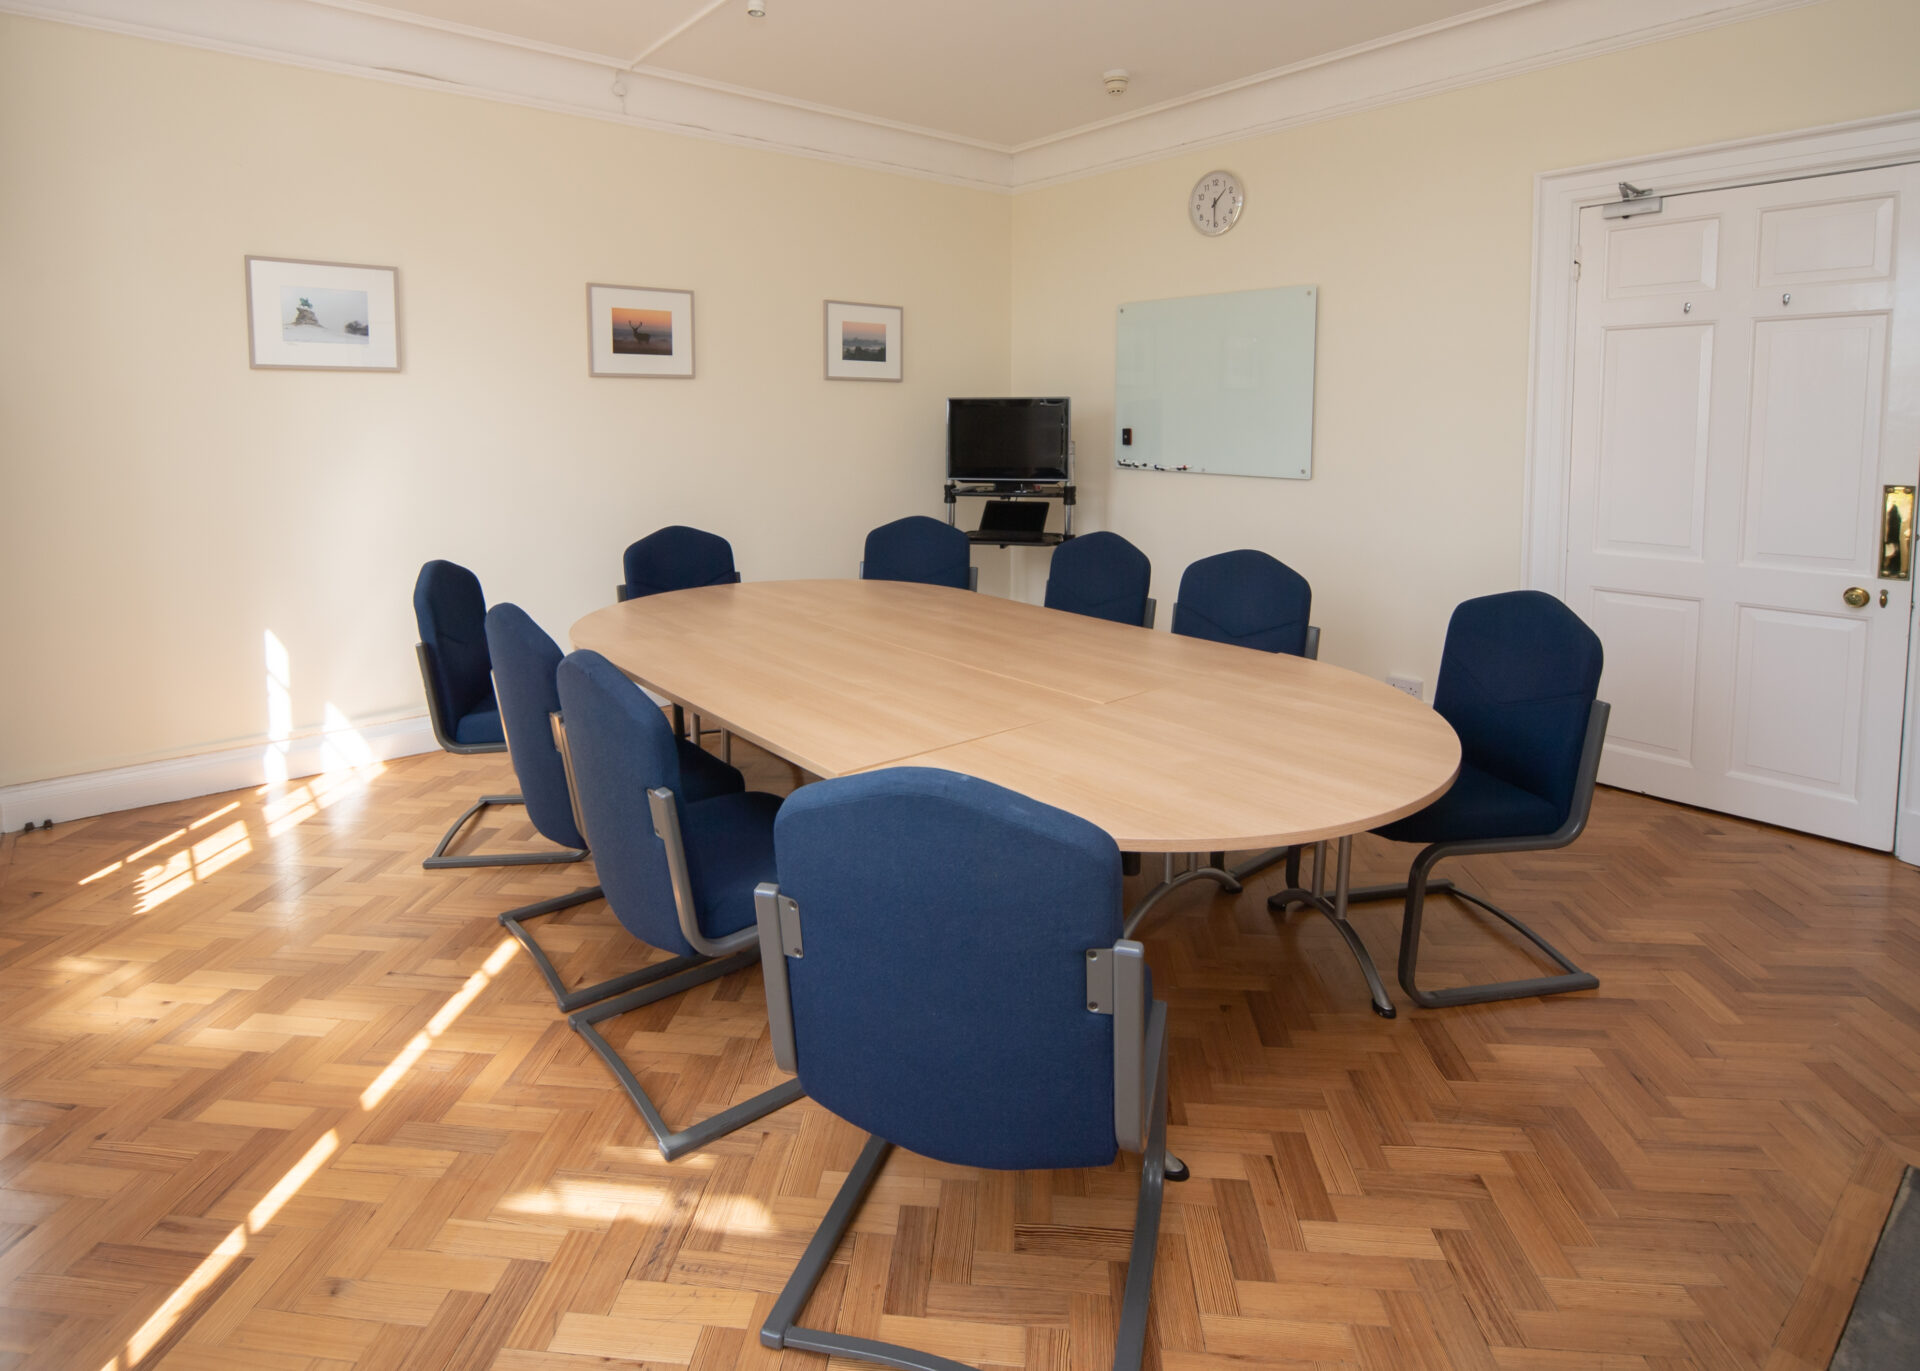 The Windsor Room, a meeting room in the main Cumberland Lodge building.